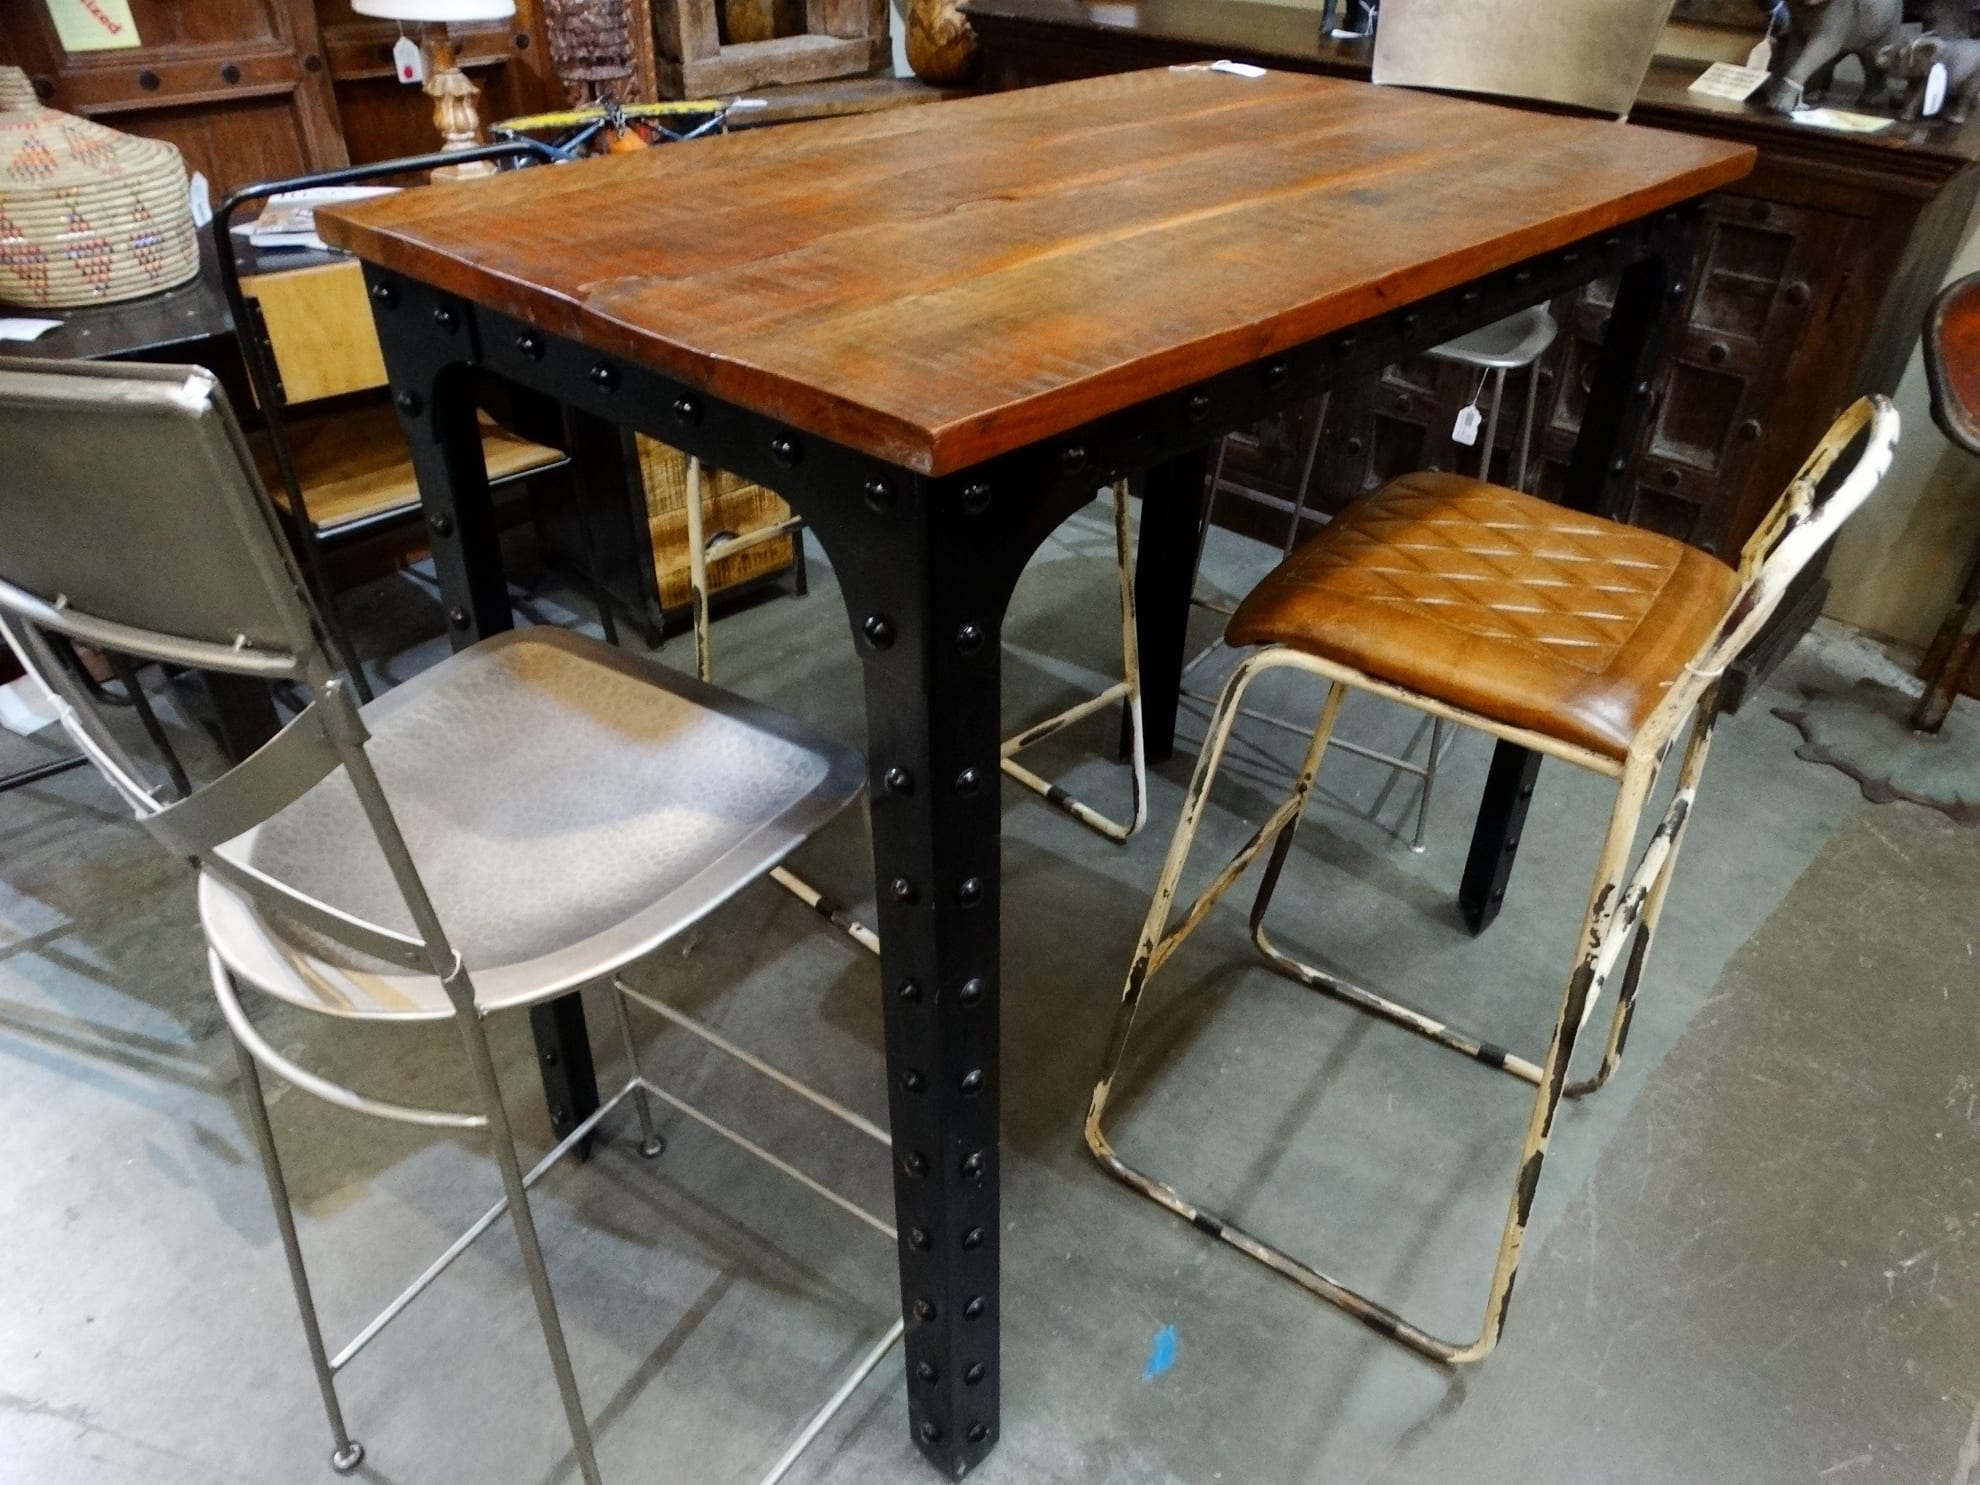 Rustic Industrial Dining Table This Tall Dining Table Has A